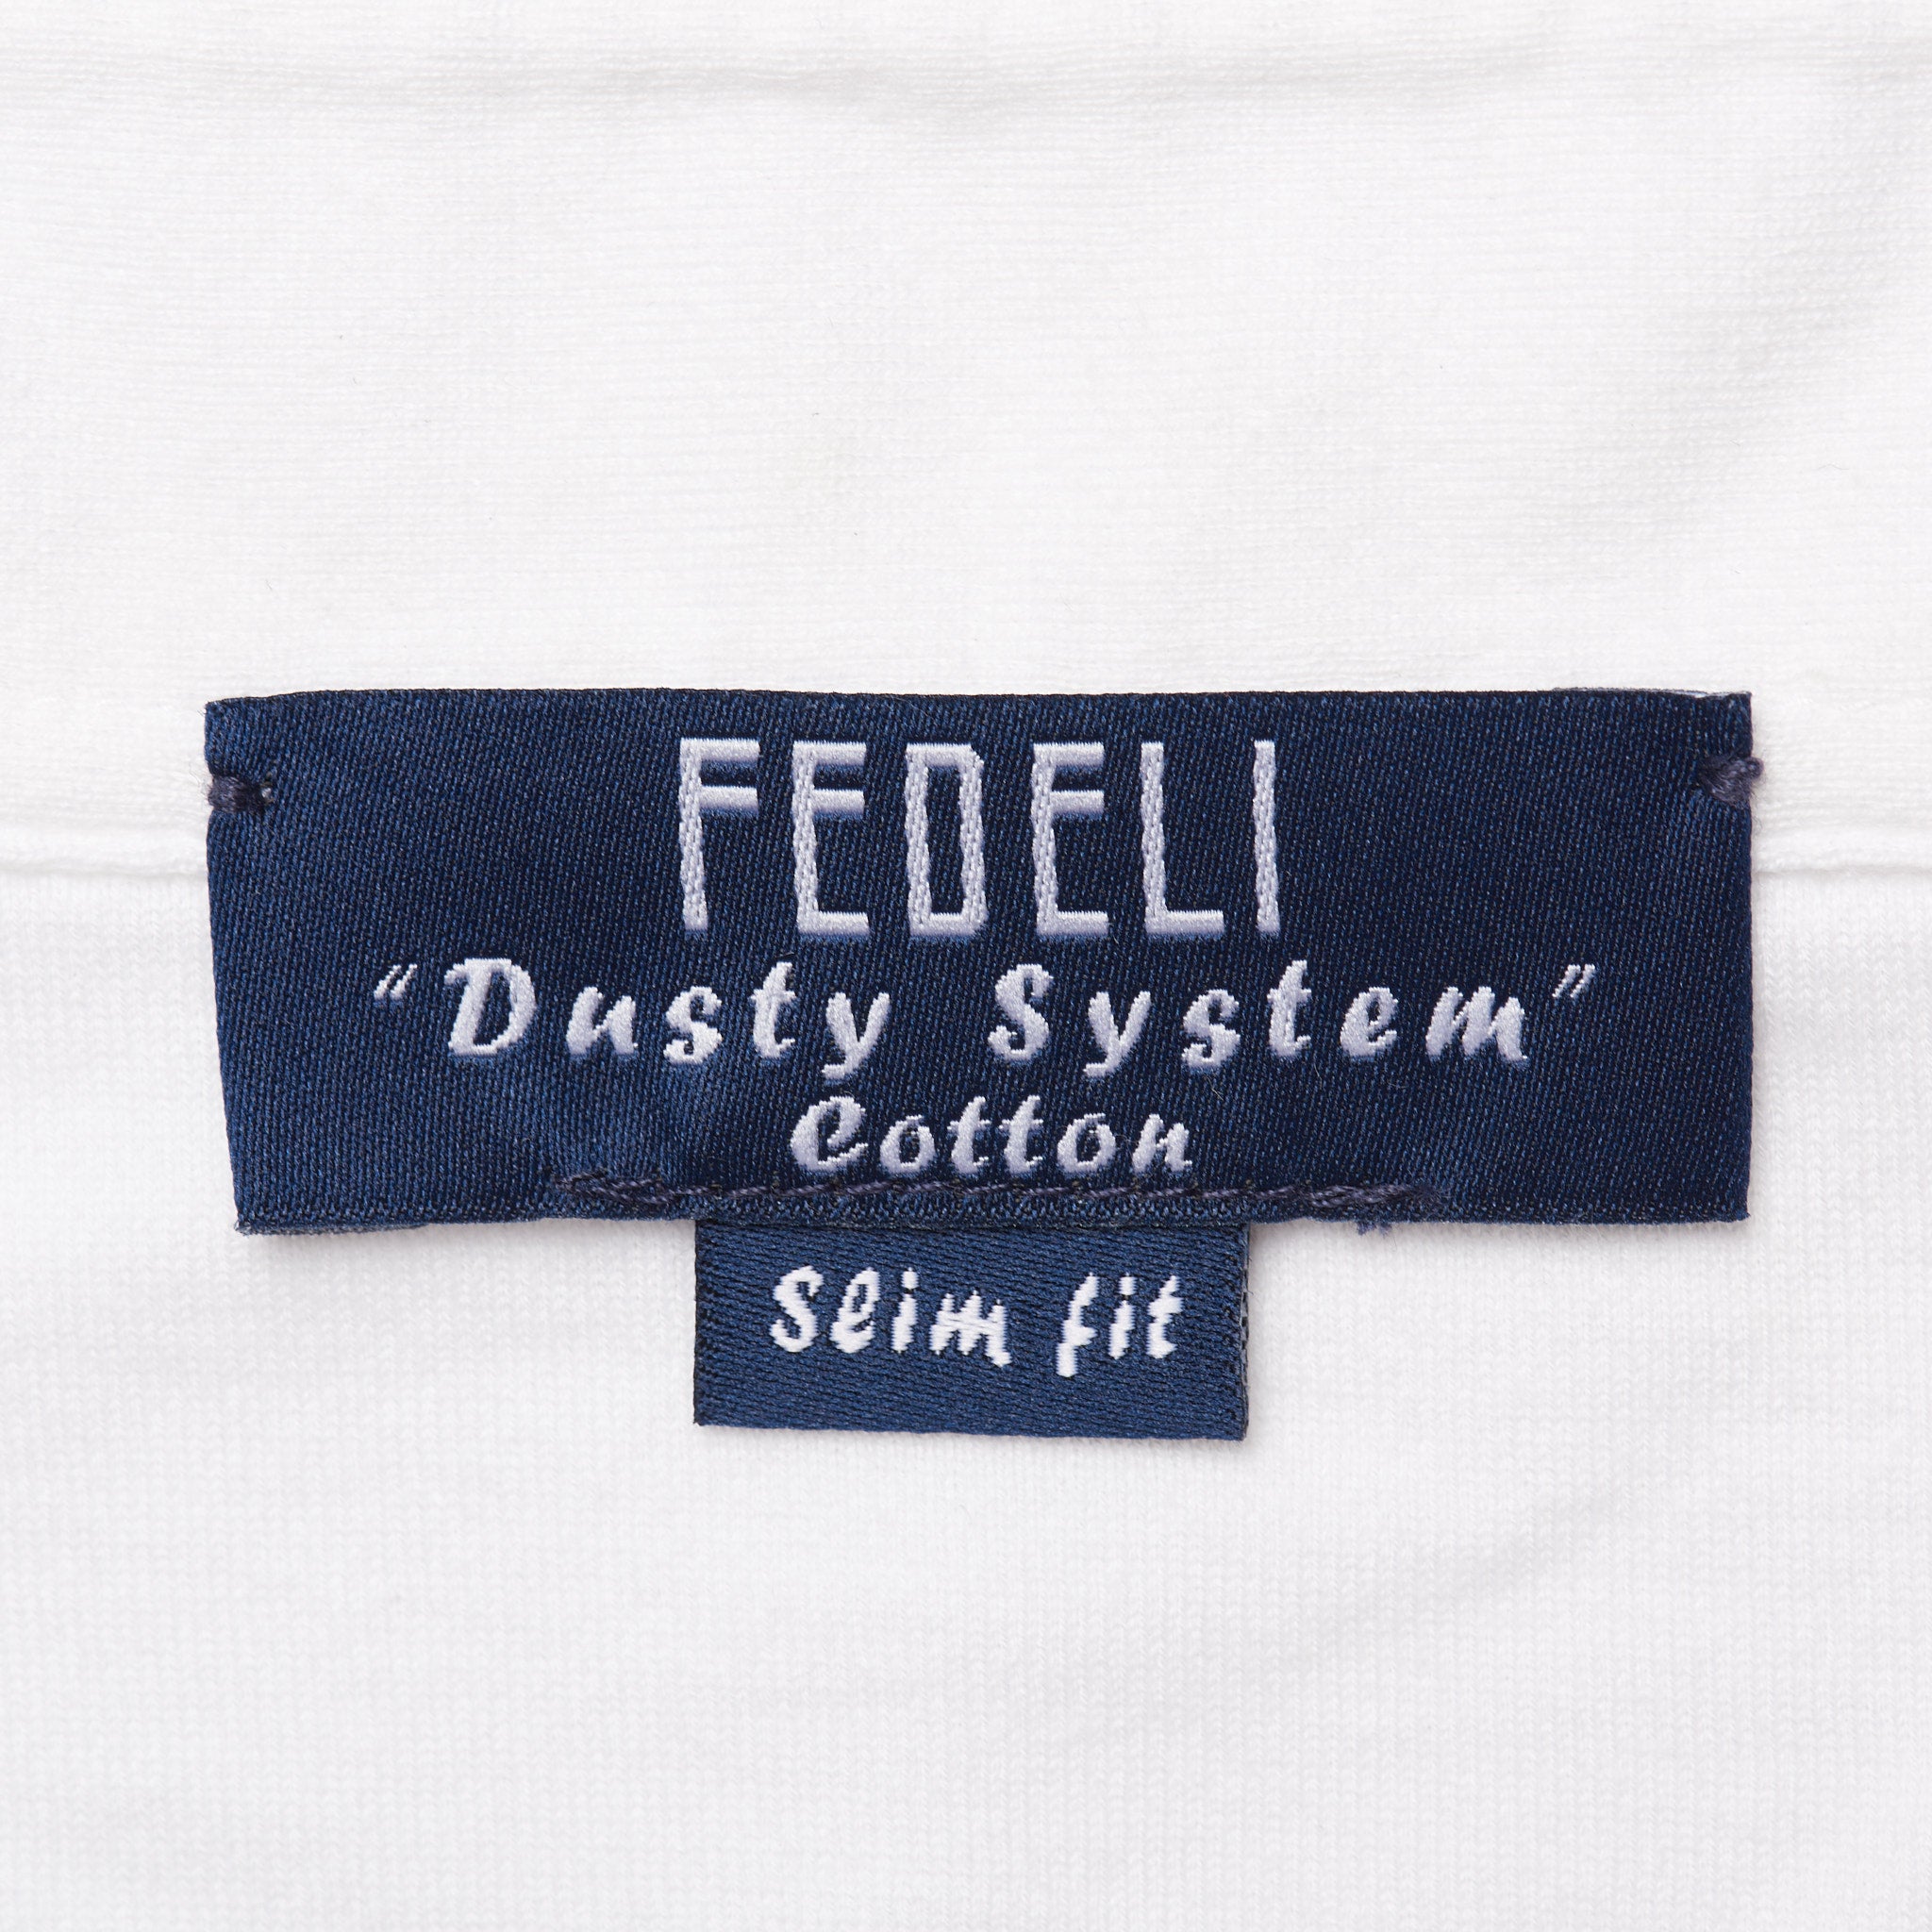 FEDELI Solid White Dusty System Cotton Long Sleeve Polo Shirt NEW Slim Fit